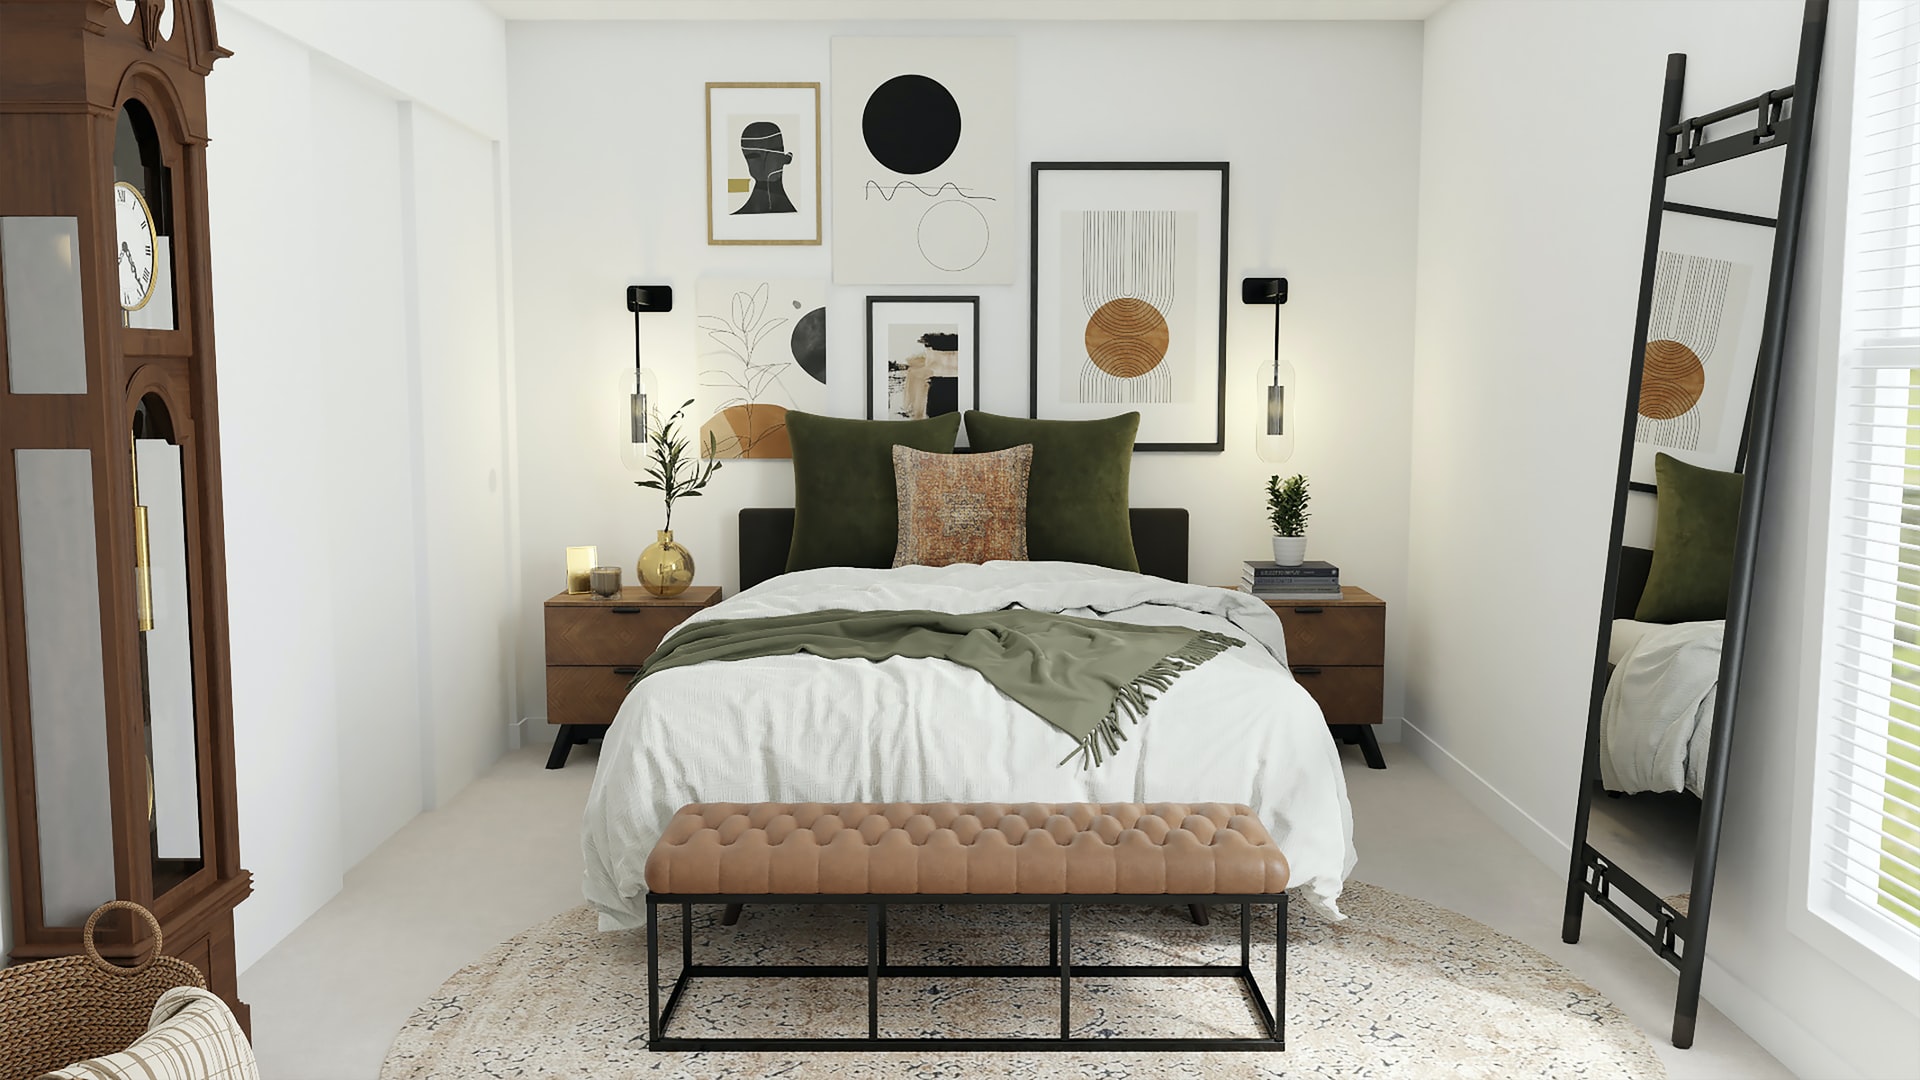 What Do You Need To Think About Before Buying A Crushed Velvet Bed?